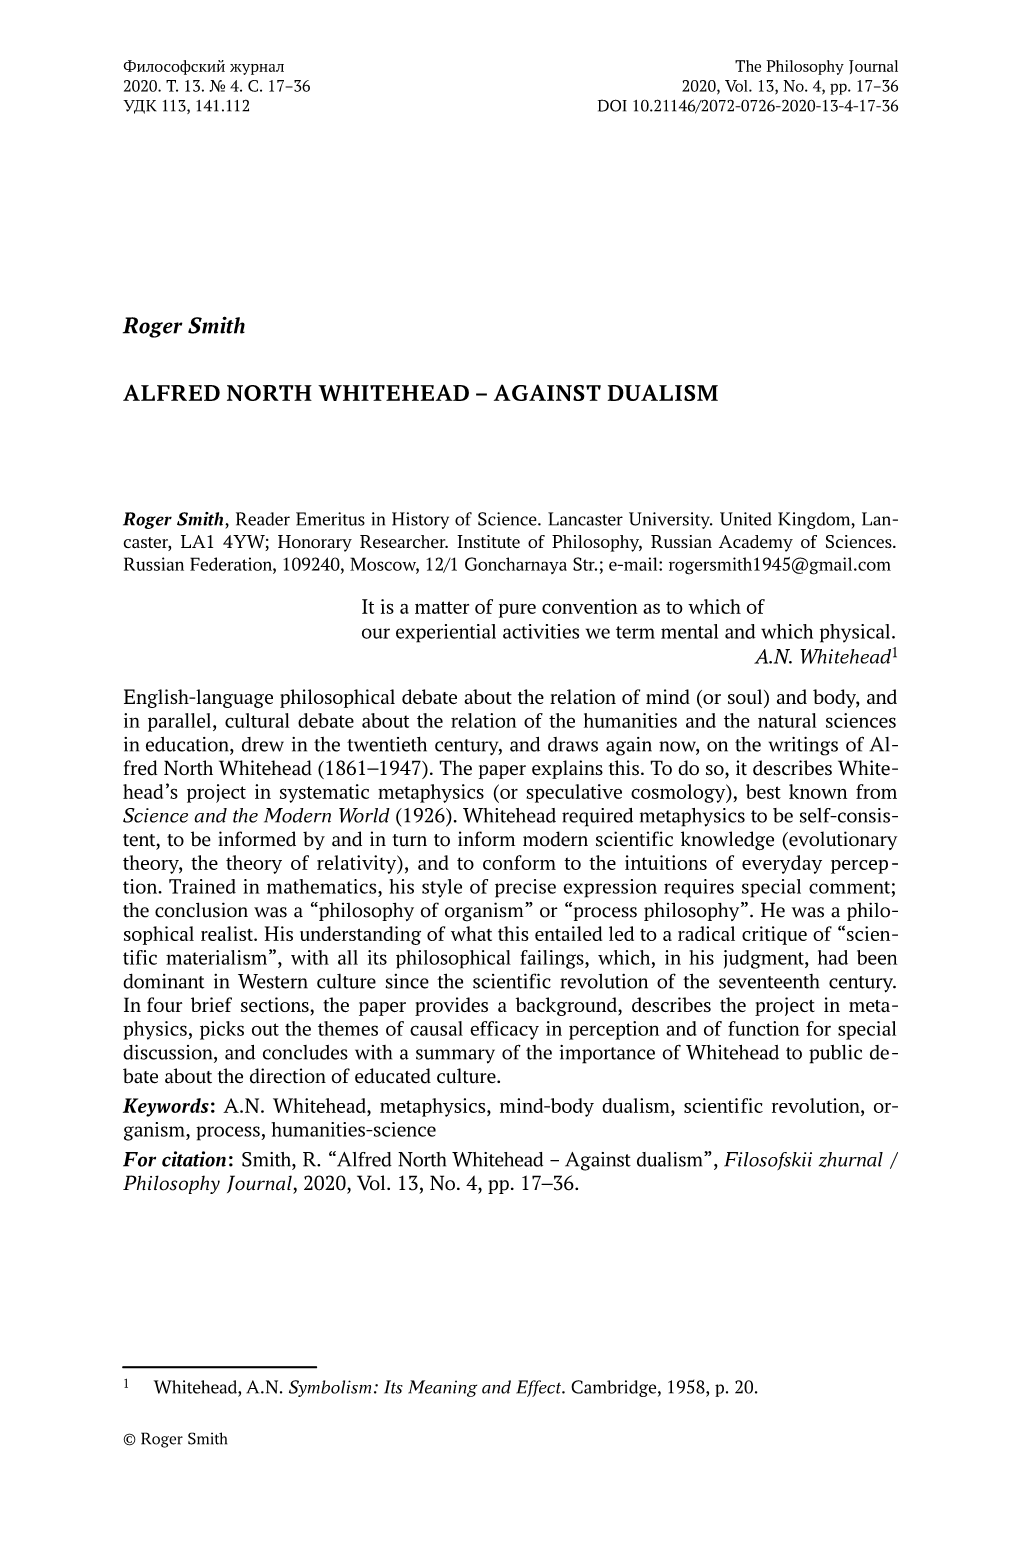 Roger Smith ALFRED NORTH WHITEHEAD – AGAINST DUALISM